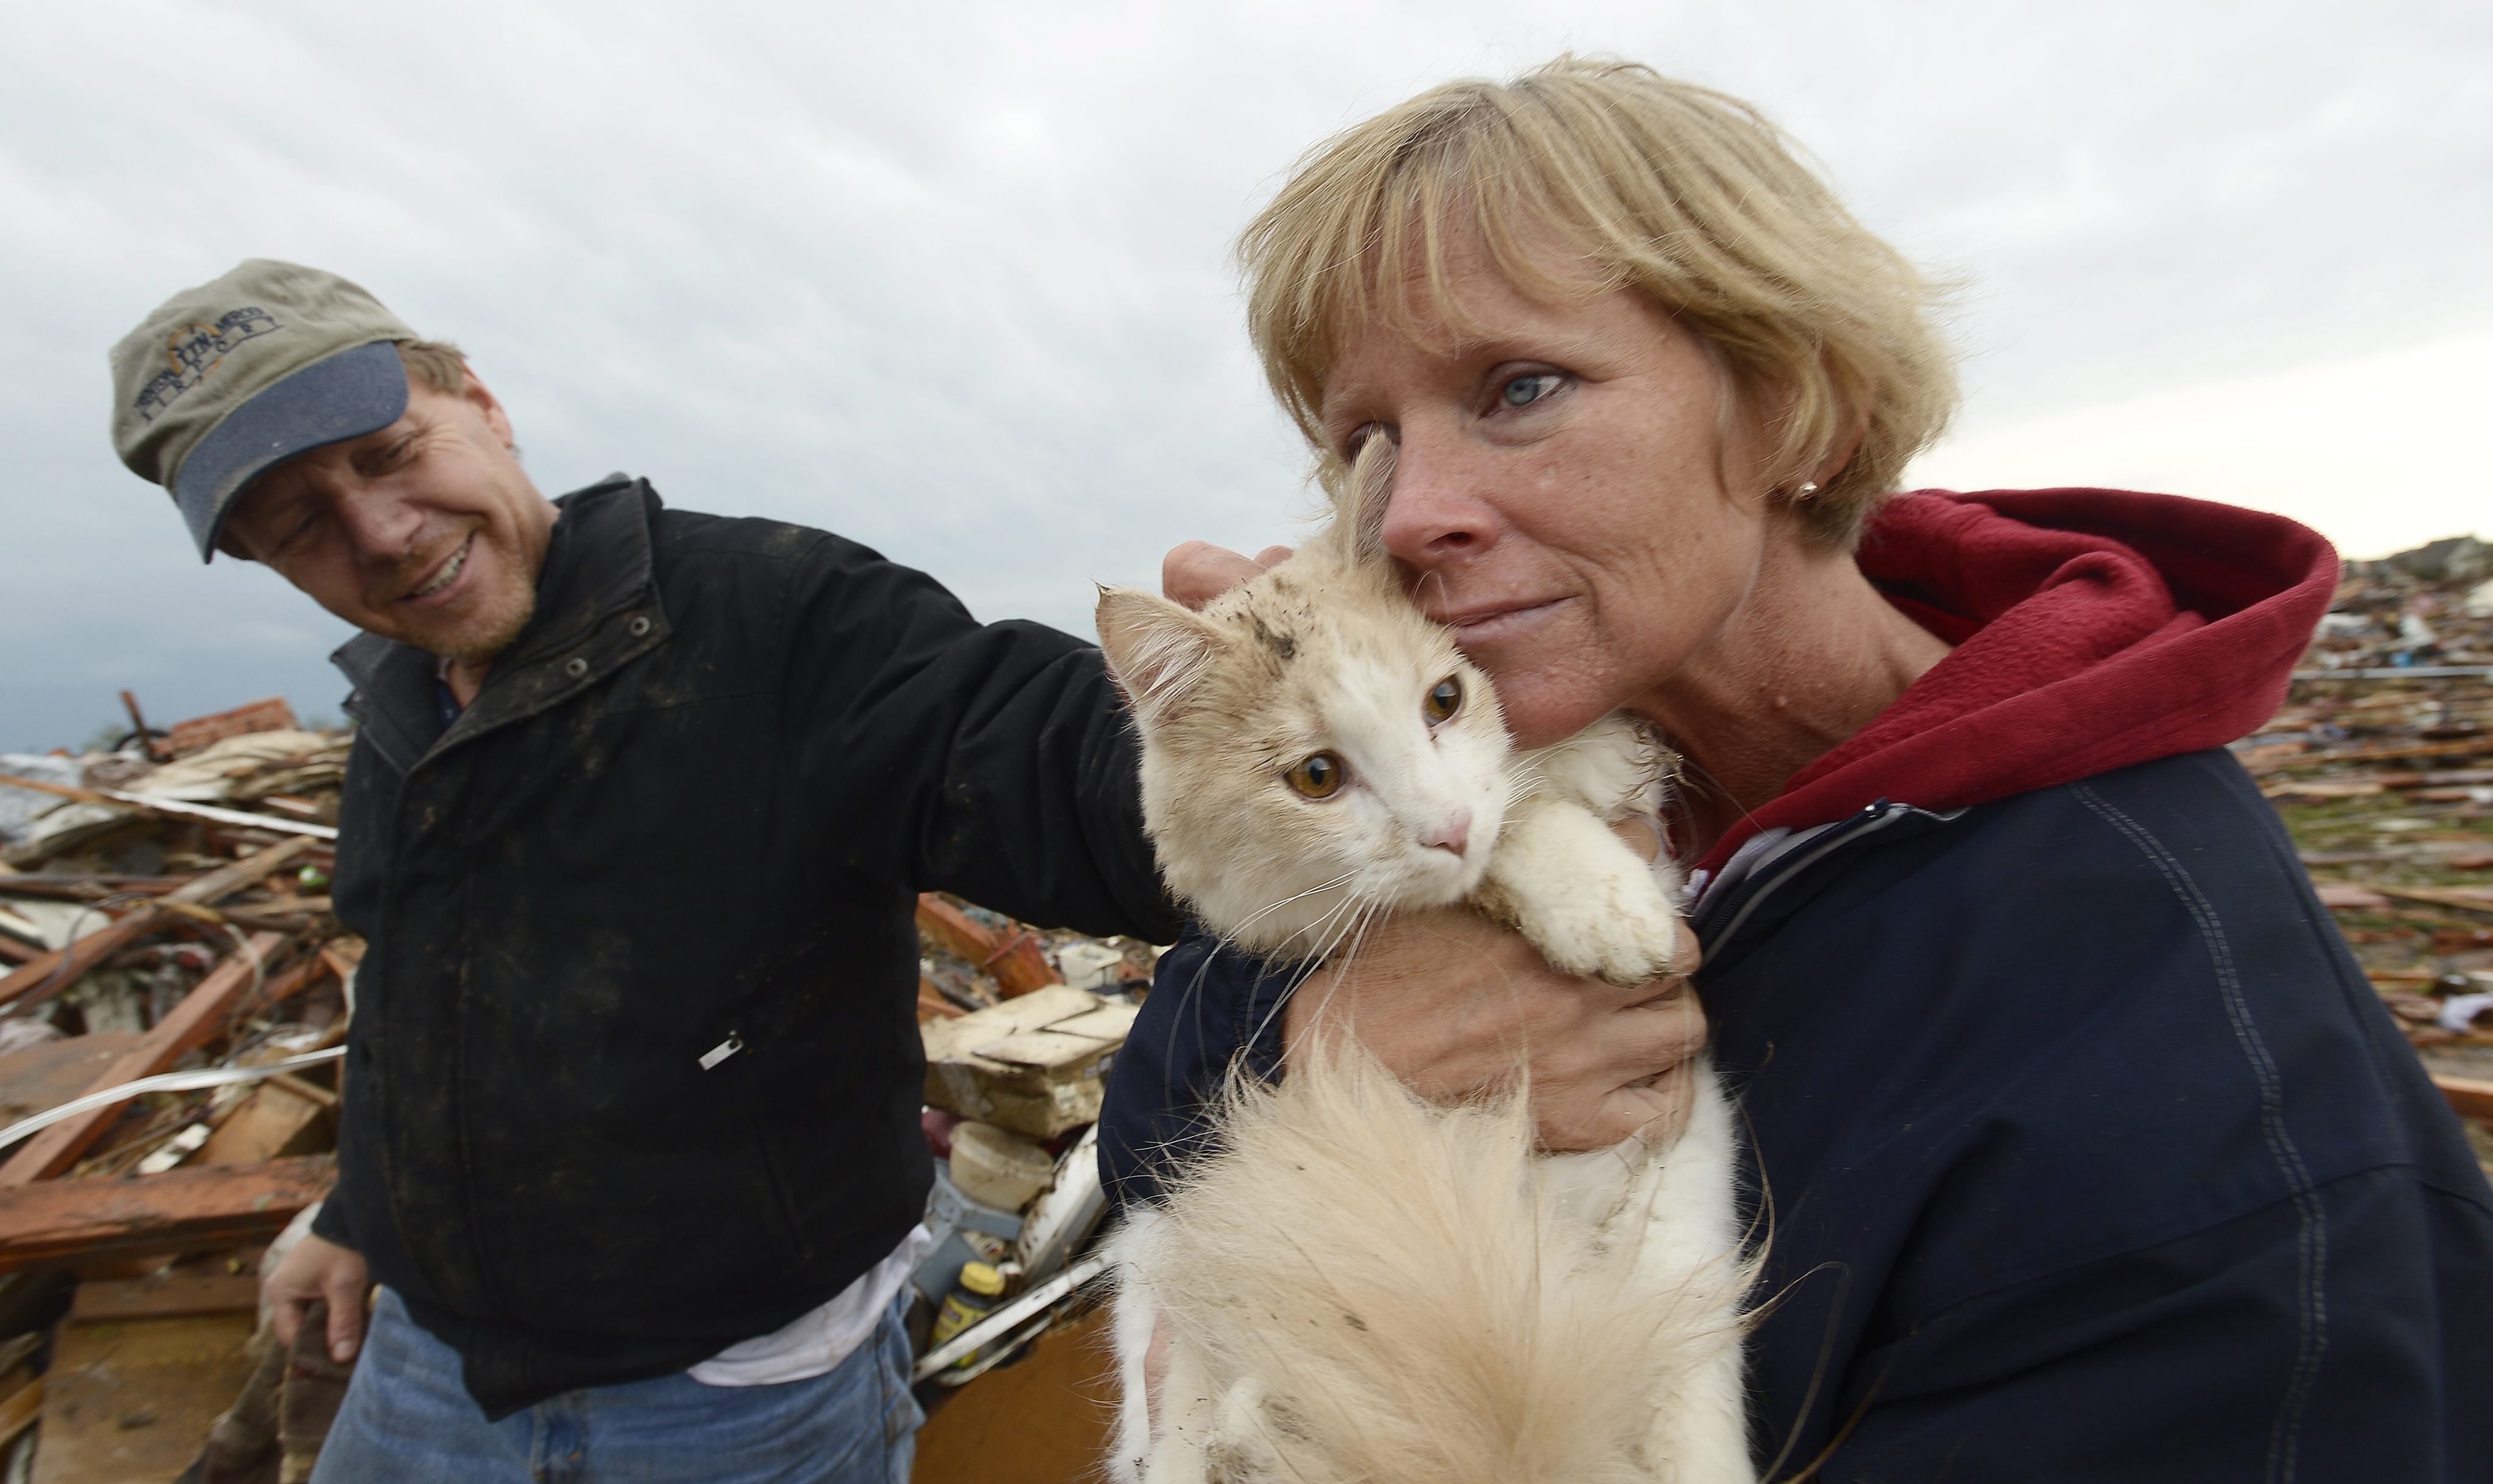 From left: Eric and June Simson hold their cat 'Sammi' seconds after finding it in the rubble of their home in a destroyed neighborhood in Moore, Okla., May 21, 2013.